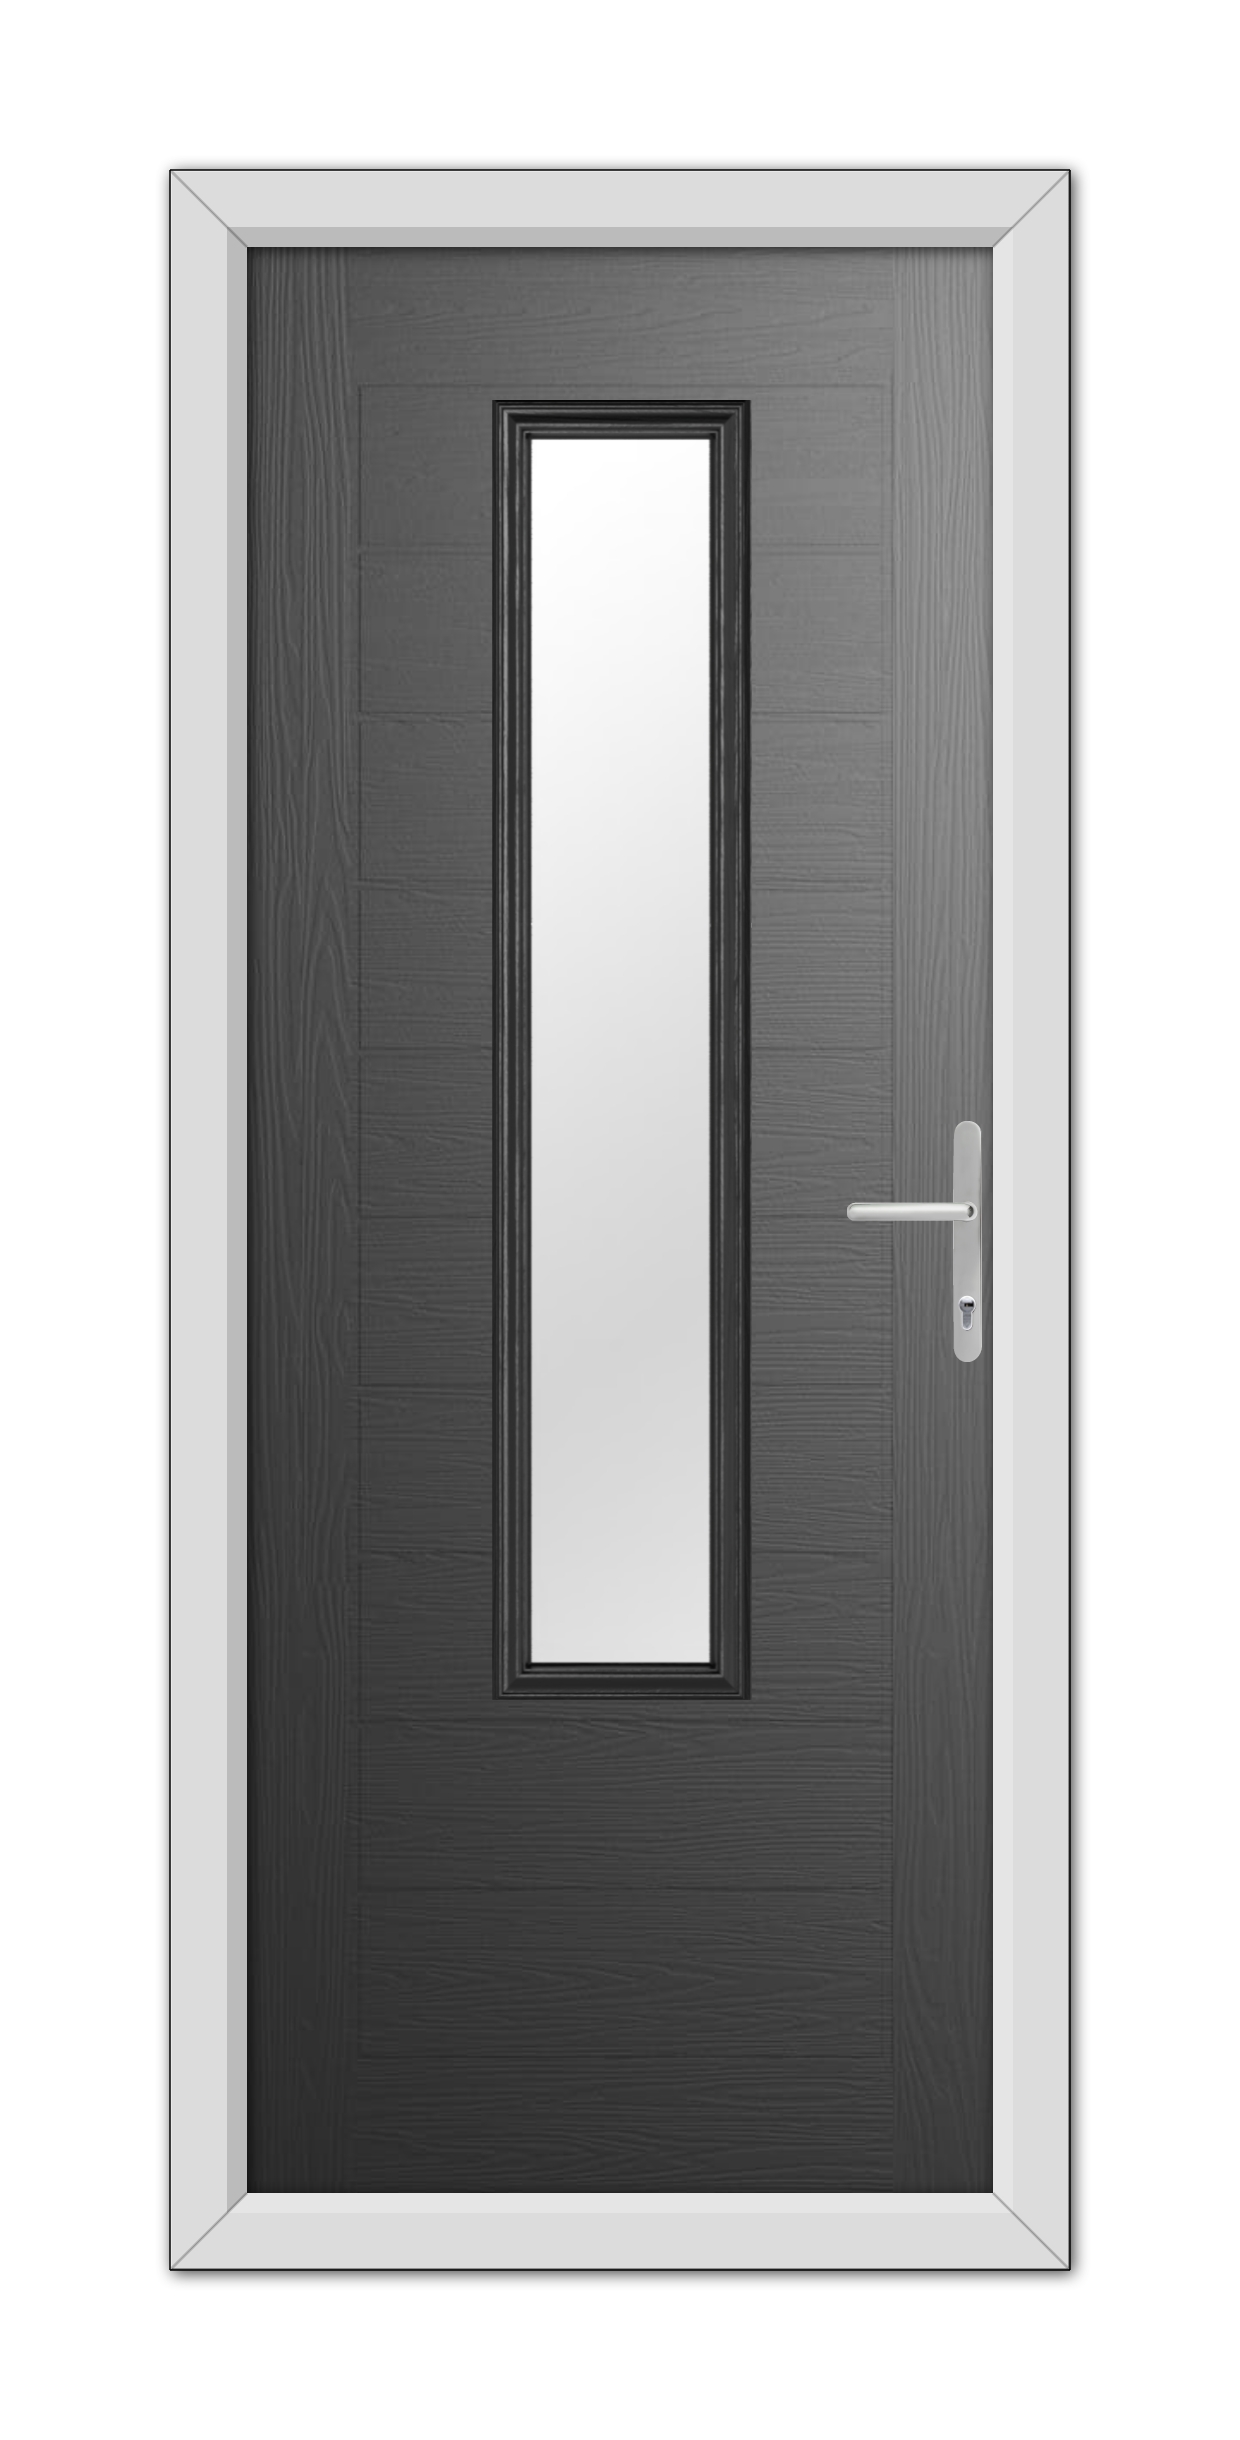 A modern Black Bedford Composite Door 48mm Timber Core with a vertical rectangular window and white handle, surrounded by a white frame, set against a white background.